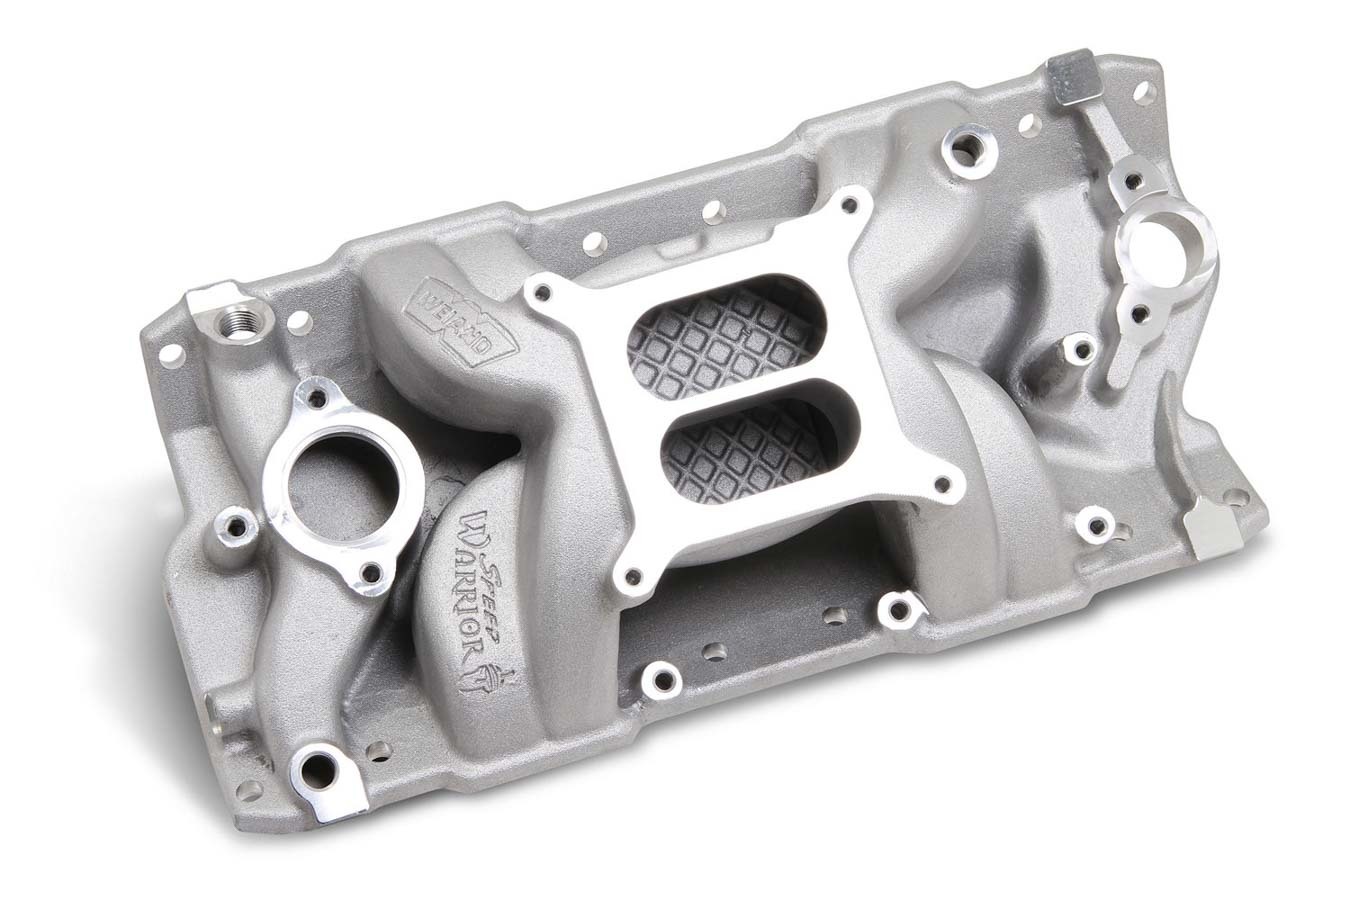 Weiand 8501 Intake Manifold, Speed Warrior, Square Bore, Dual Plane, Aluminum, Natural, Small Block Chevy, Each